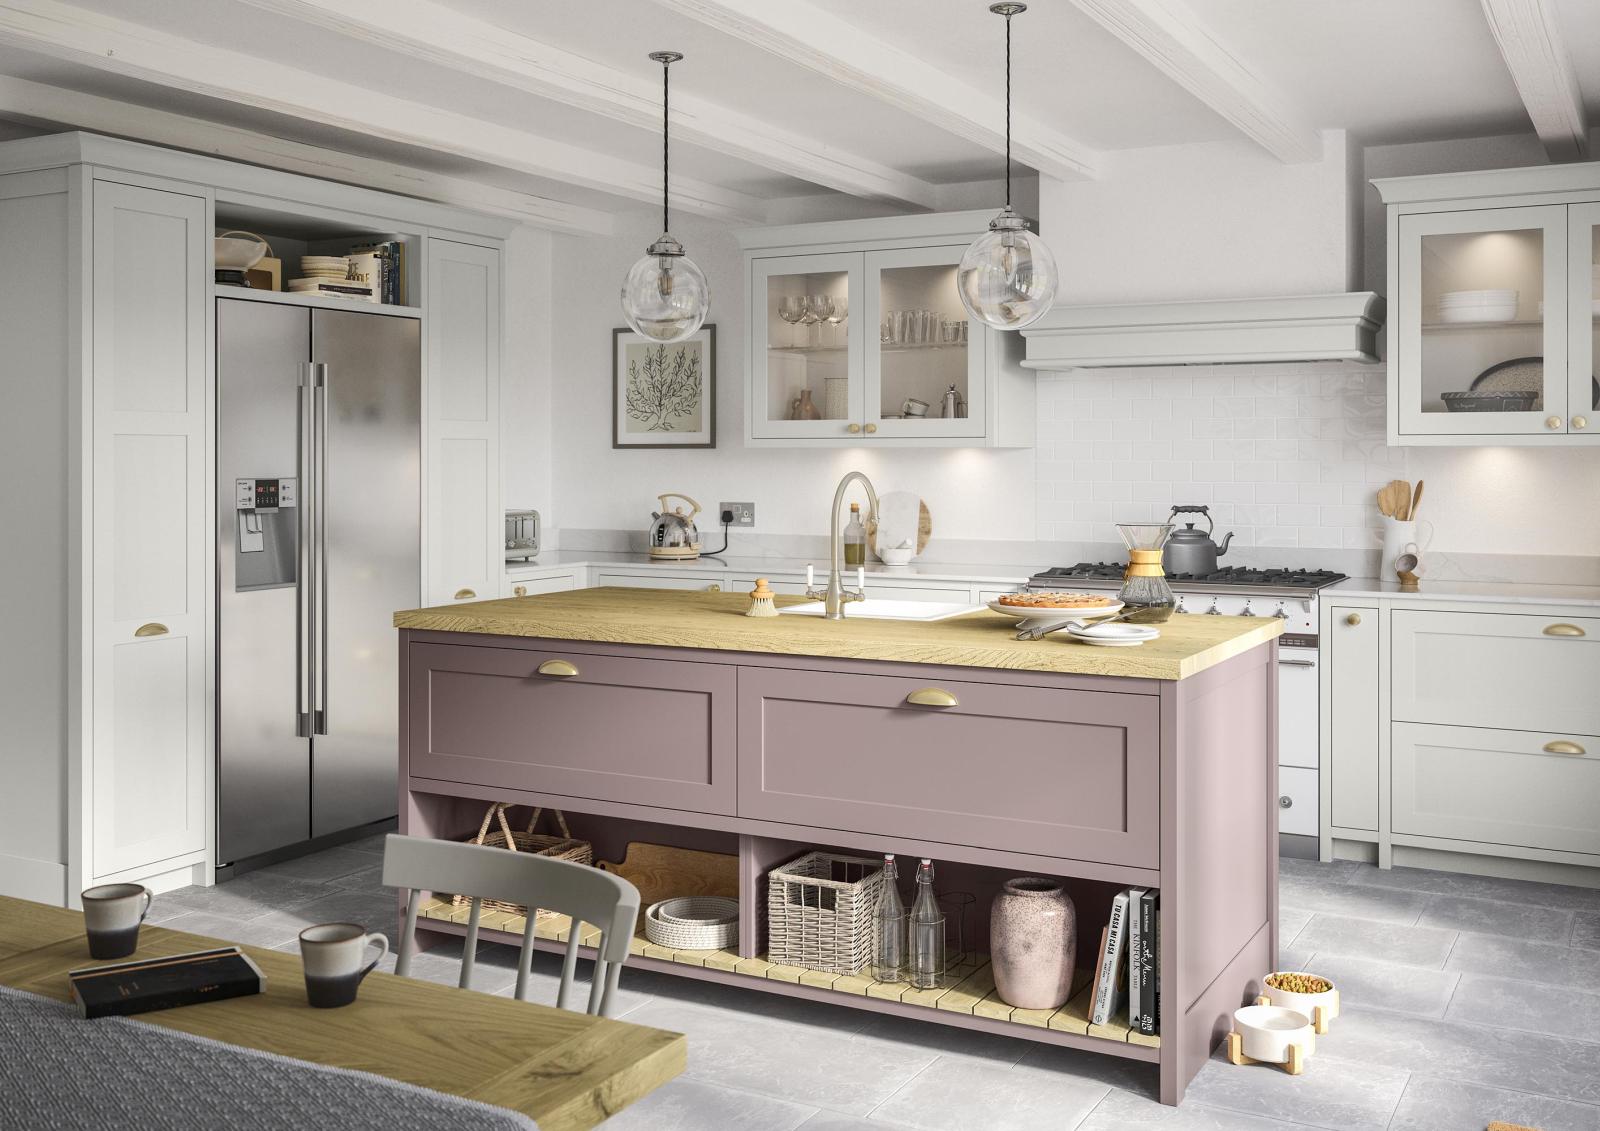 Smooth-finish, slim-frame, shaker-style kitchen painted vintage pink and light grey featuring central island unit, american fridge freezer, range cooker and canopy housing a recessed extractor fan